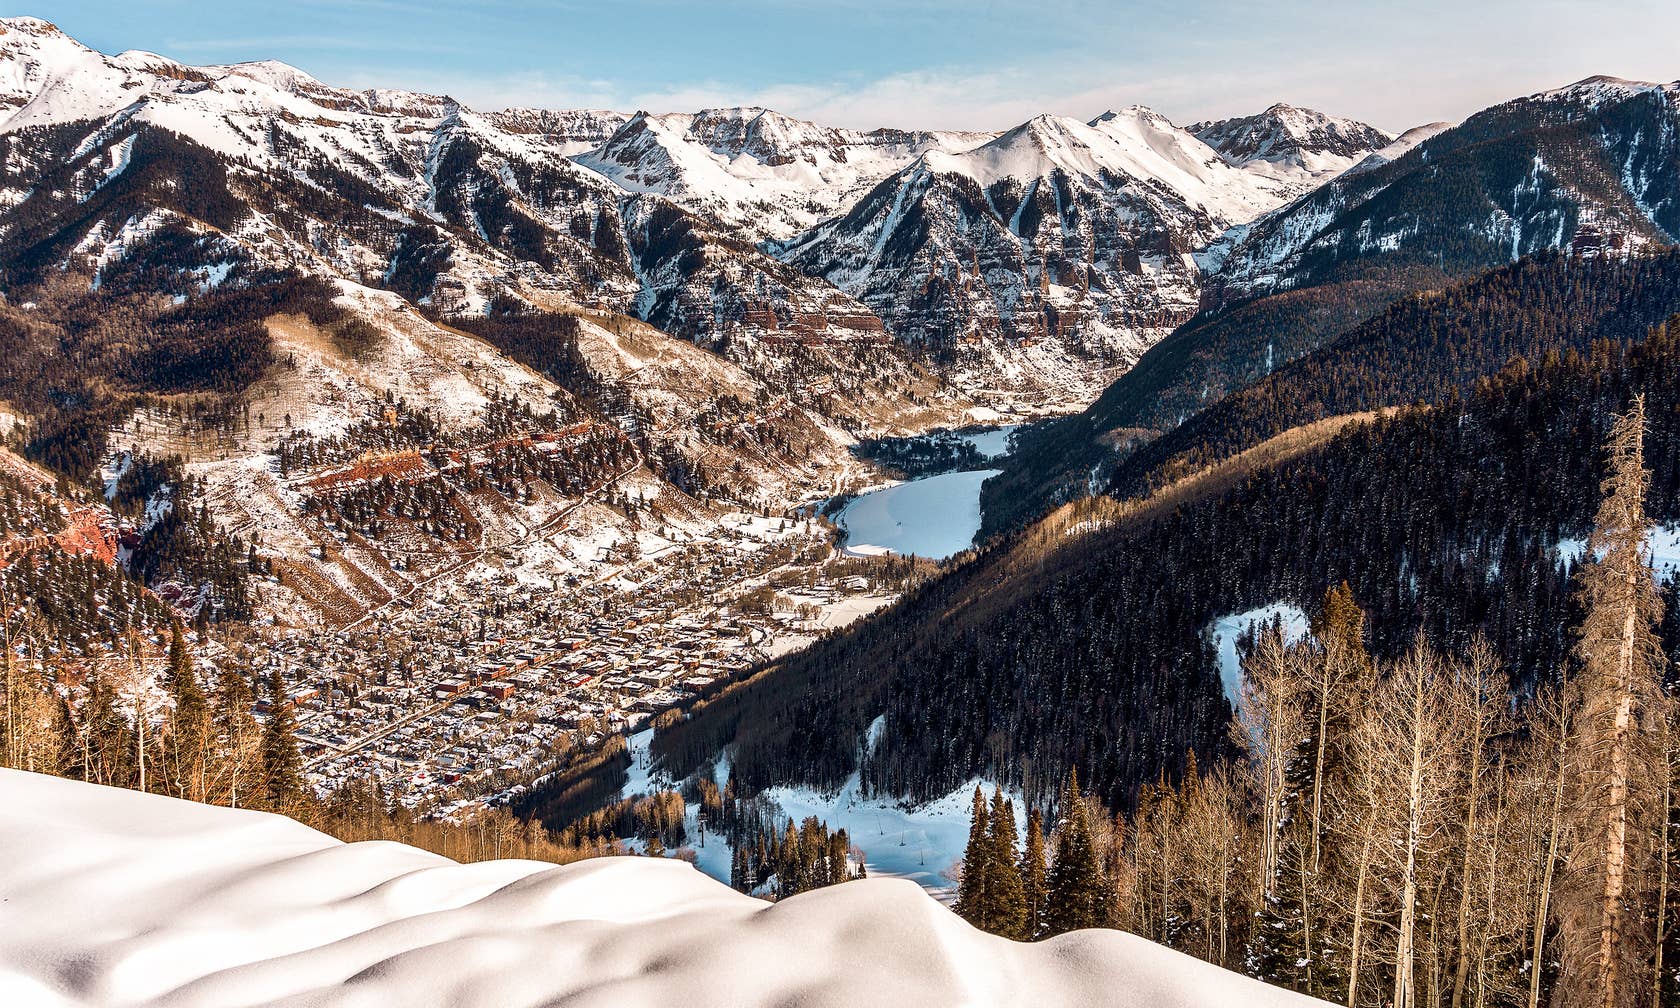 Holiday rentals in Telluride